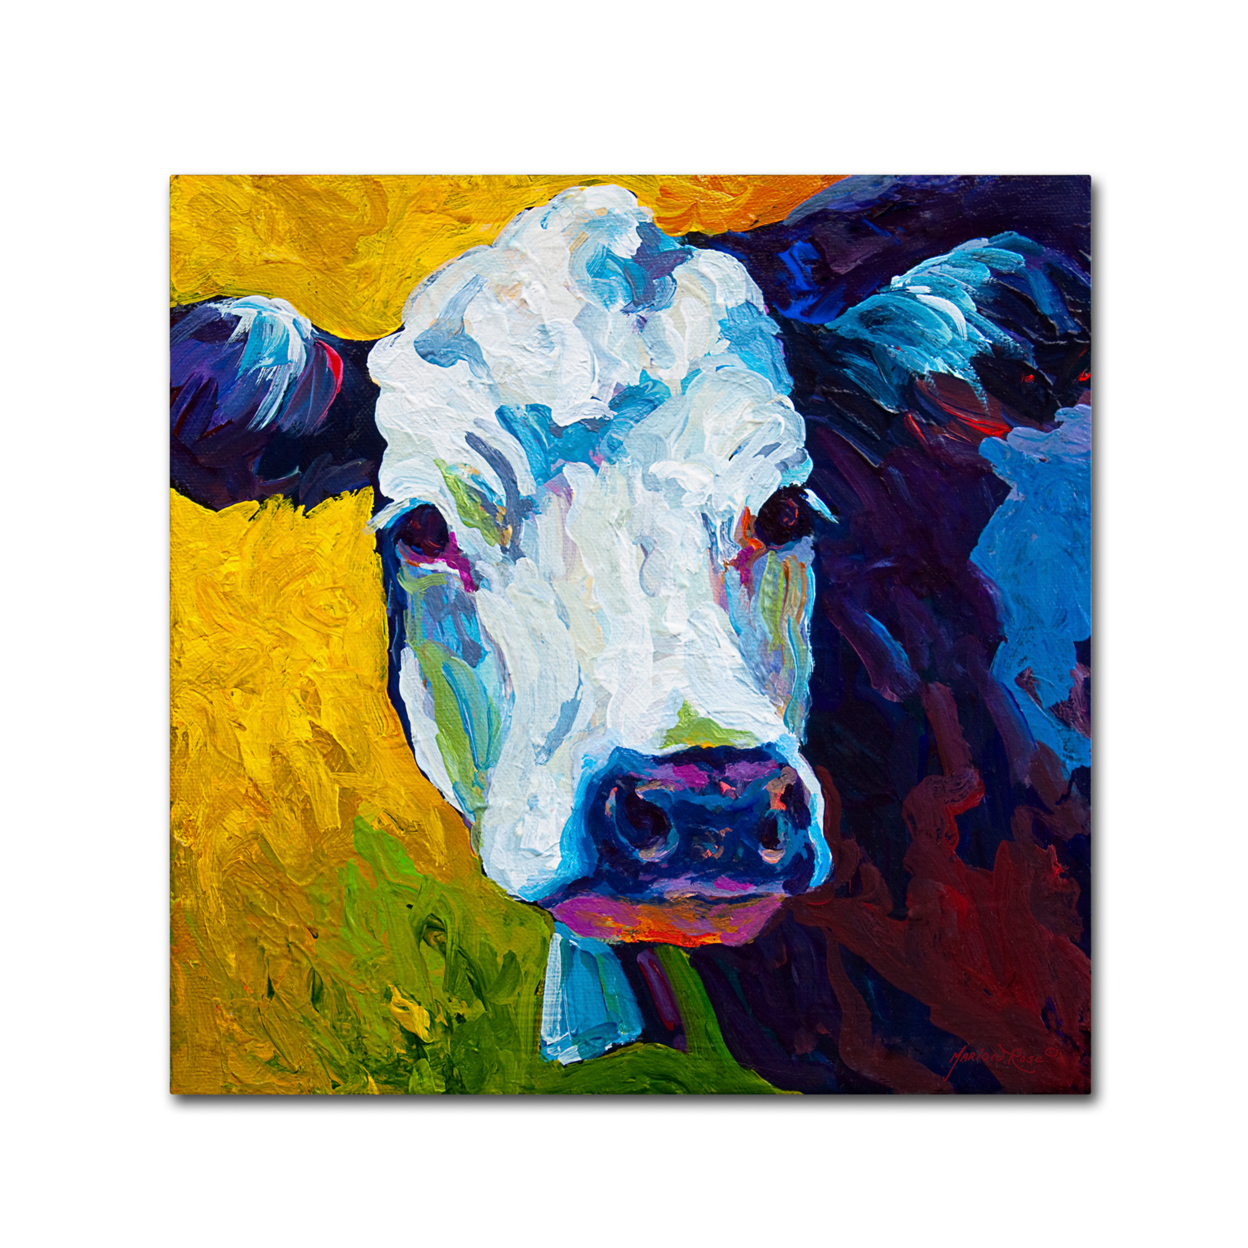 Marion Rose 'Belle' Ready To Hang Canvas Art 24 X 24 Inches Made In USA